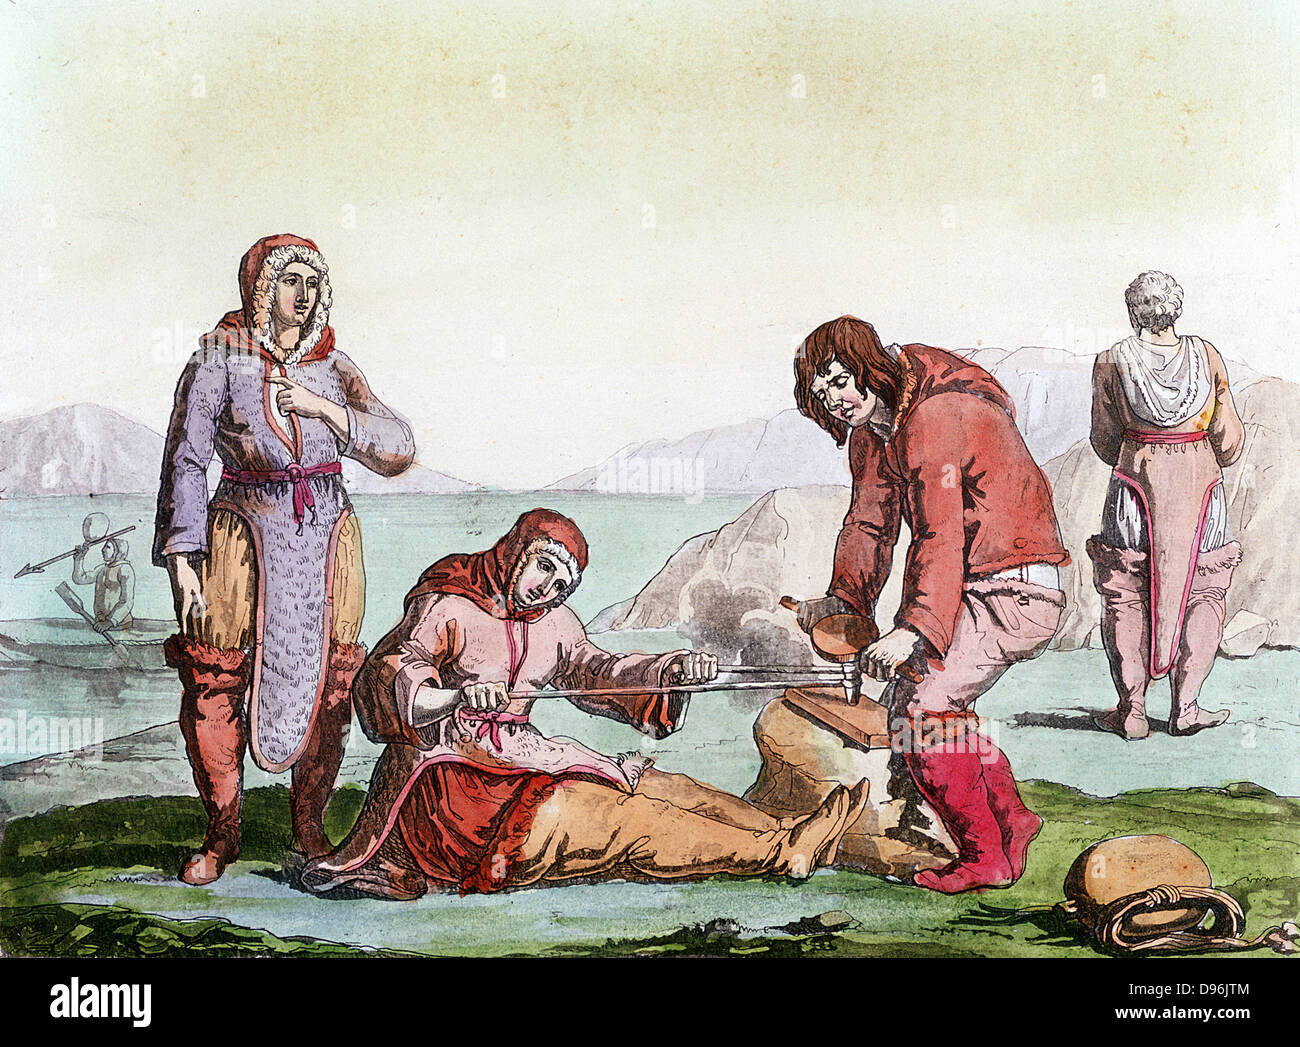 Natives of the Arctic, dressed in animal skins, using a thong drill to make fire (blister method). From 'Costume Antico et Moderno', Rome, 1825-35 Stock Photo